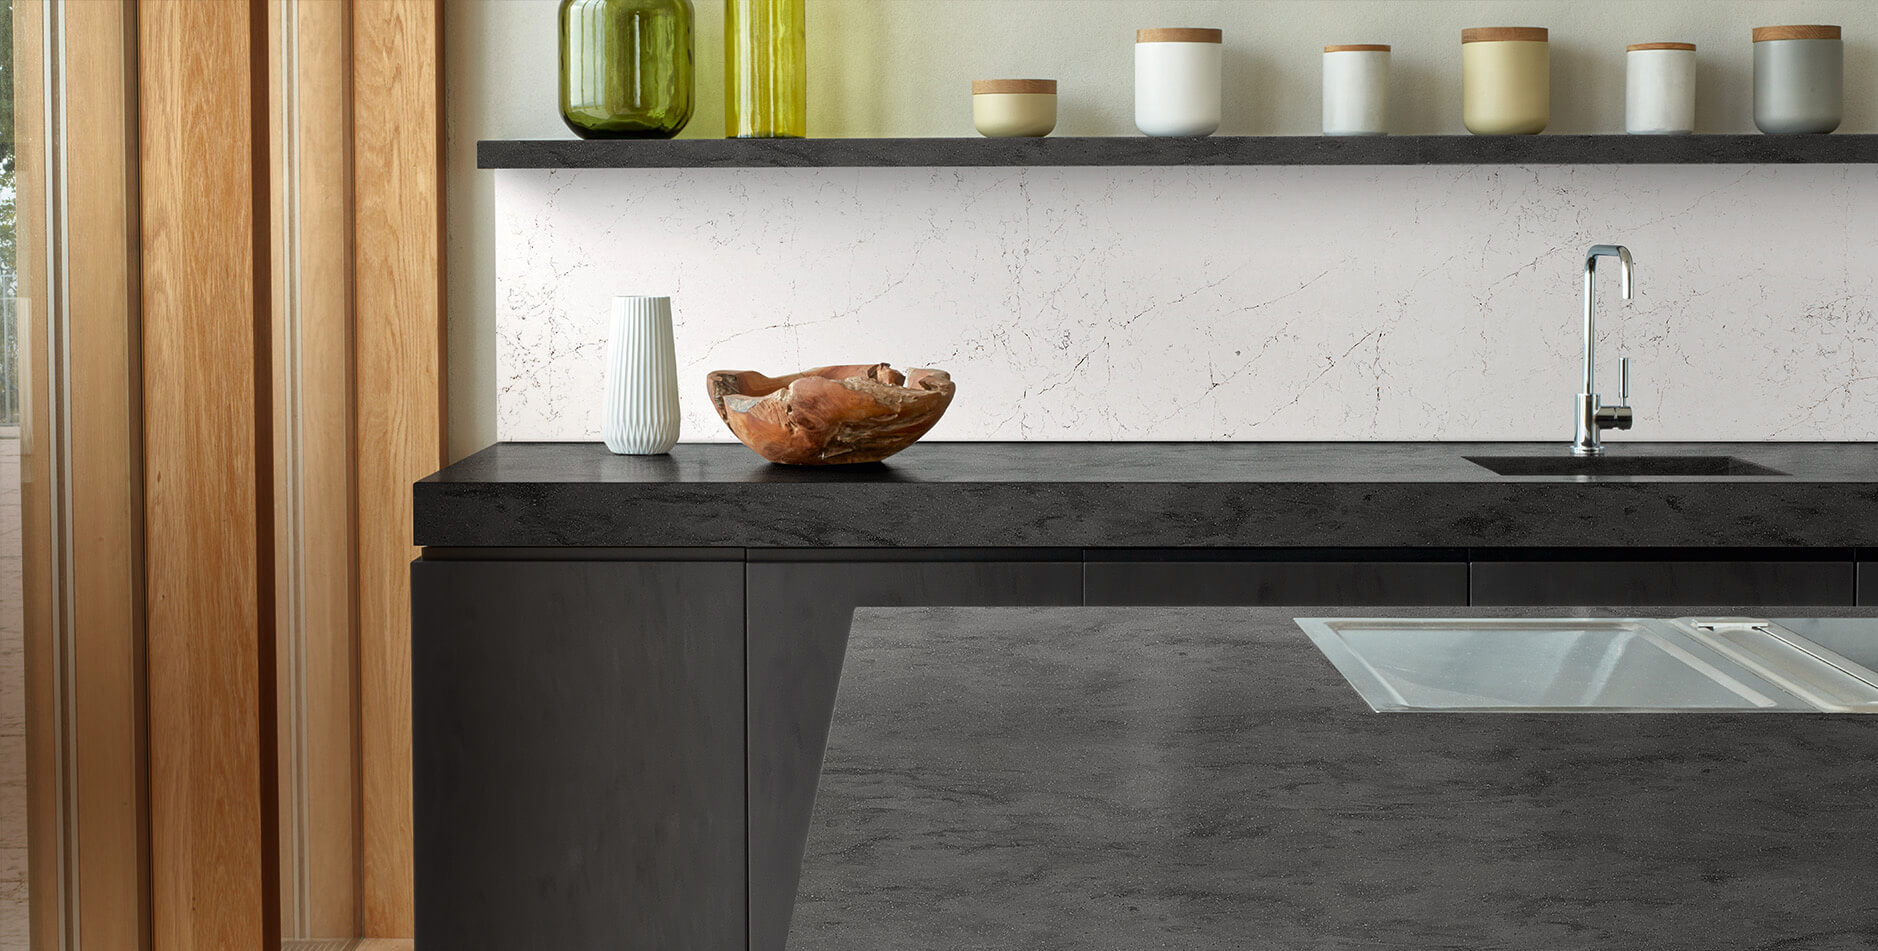 Concrete Worktop with Beautiful Drainer